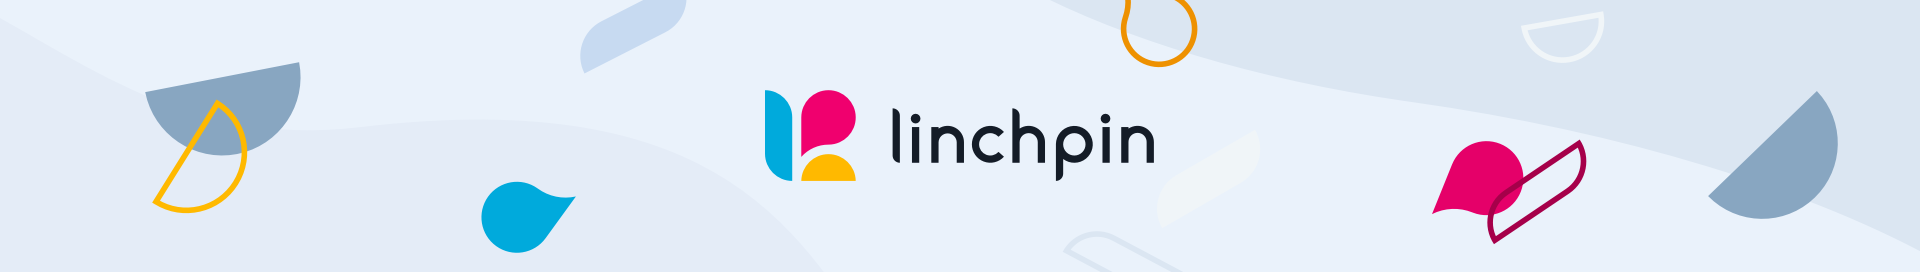 By You, for You: 5 New Features for the Linchpin Intranet Suite! - banner with linchpin logo